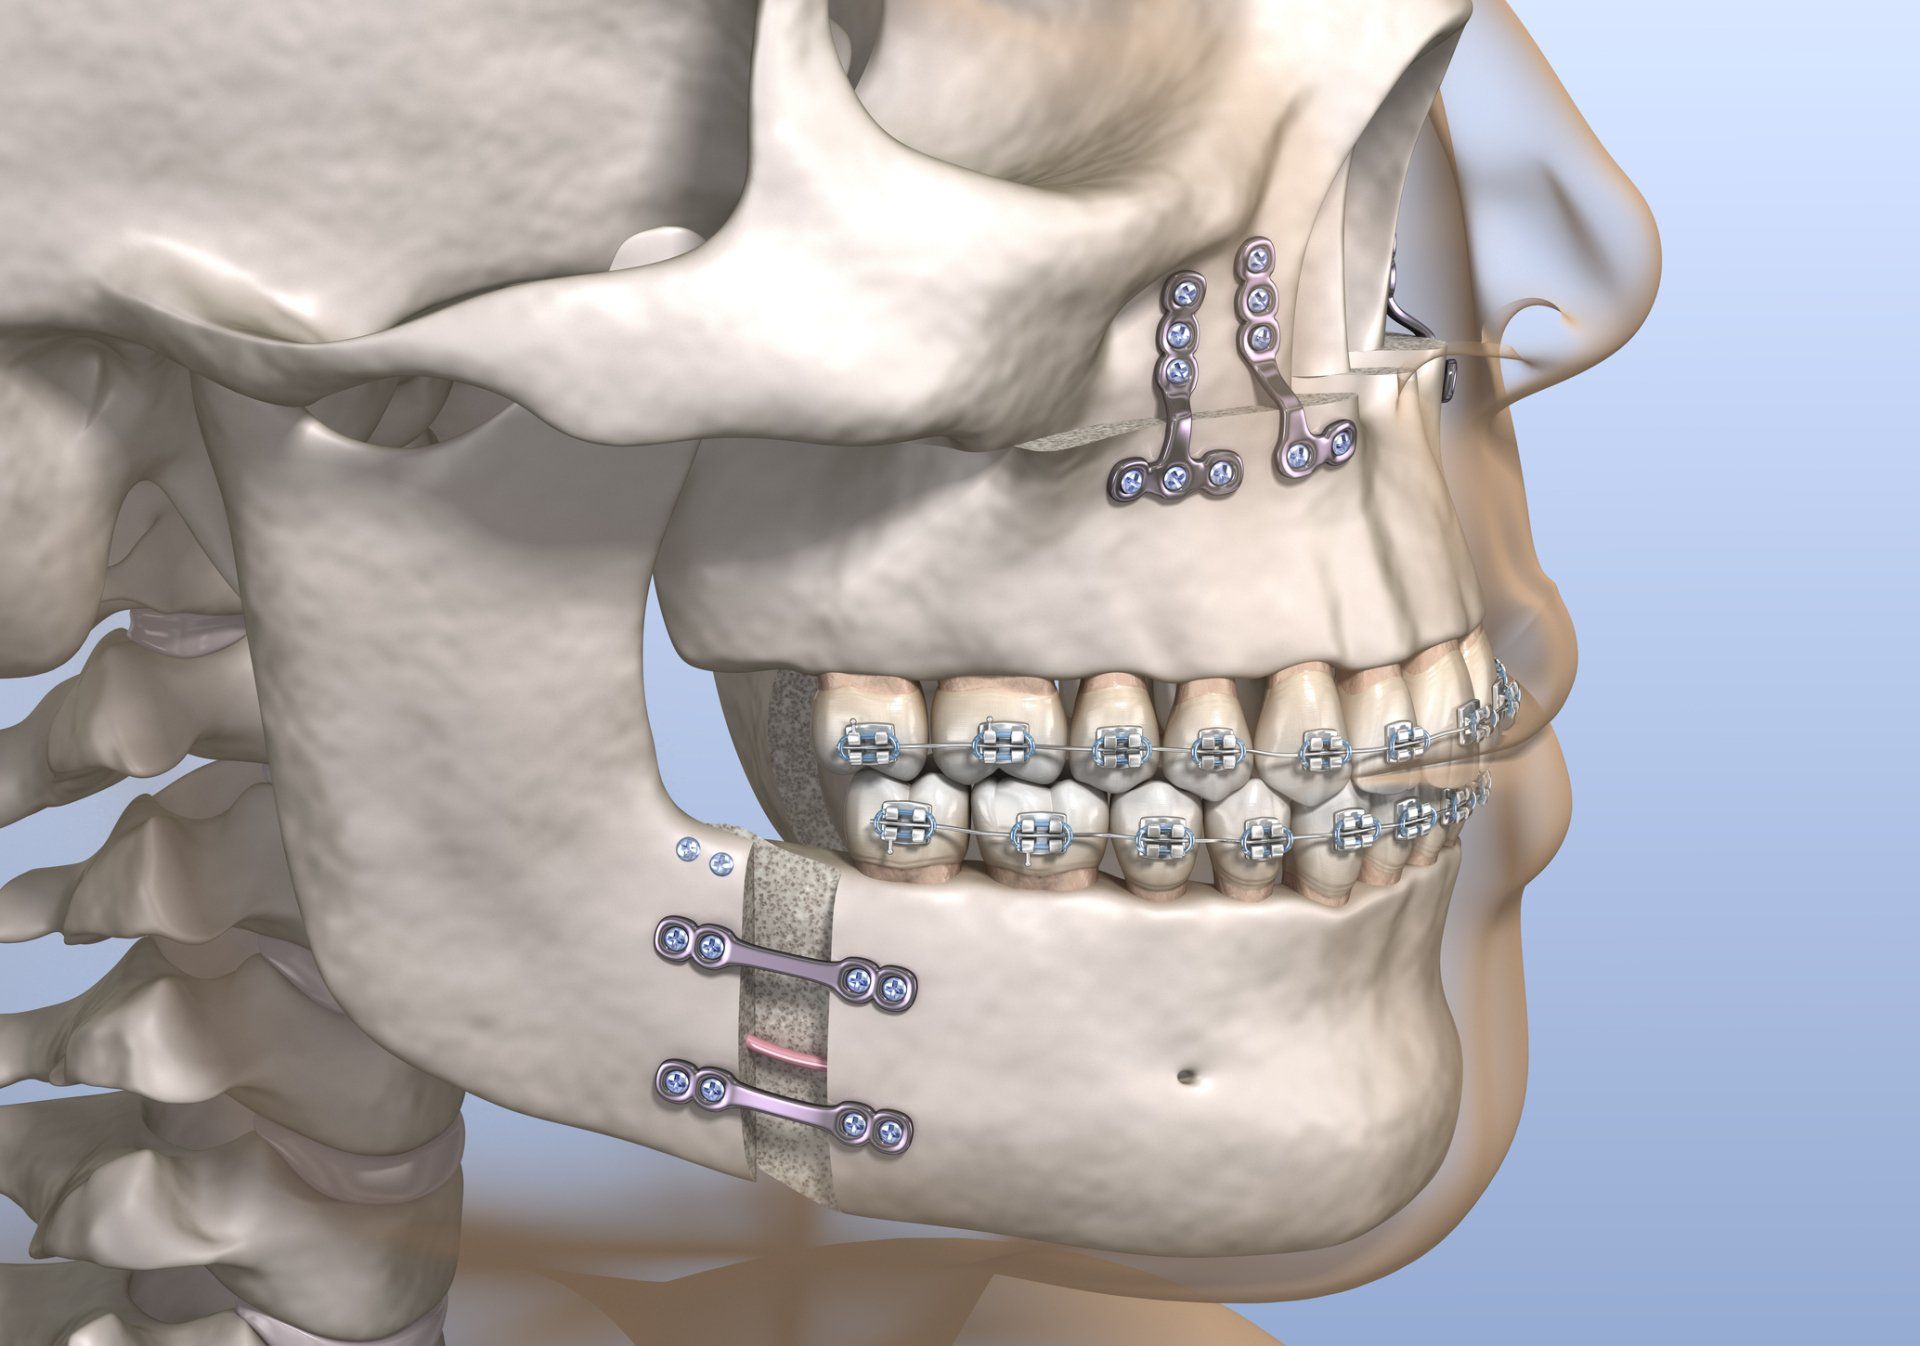 Jaw surgery illustration — Jackson, MS — Central MS OMS